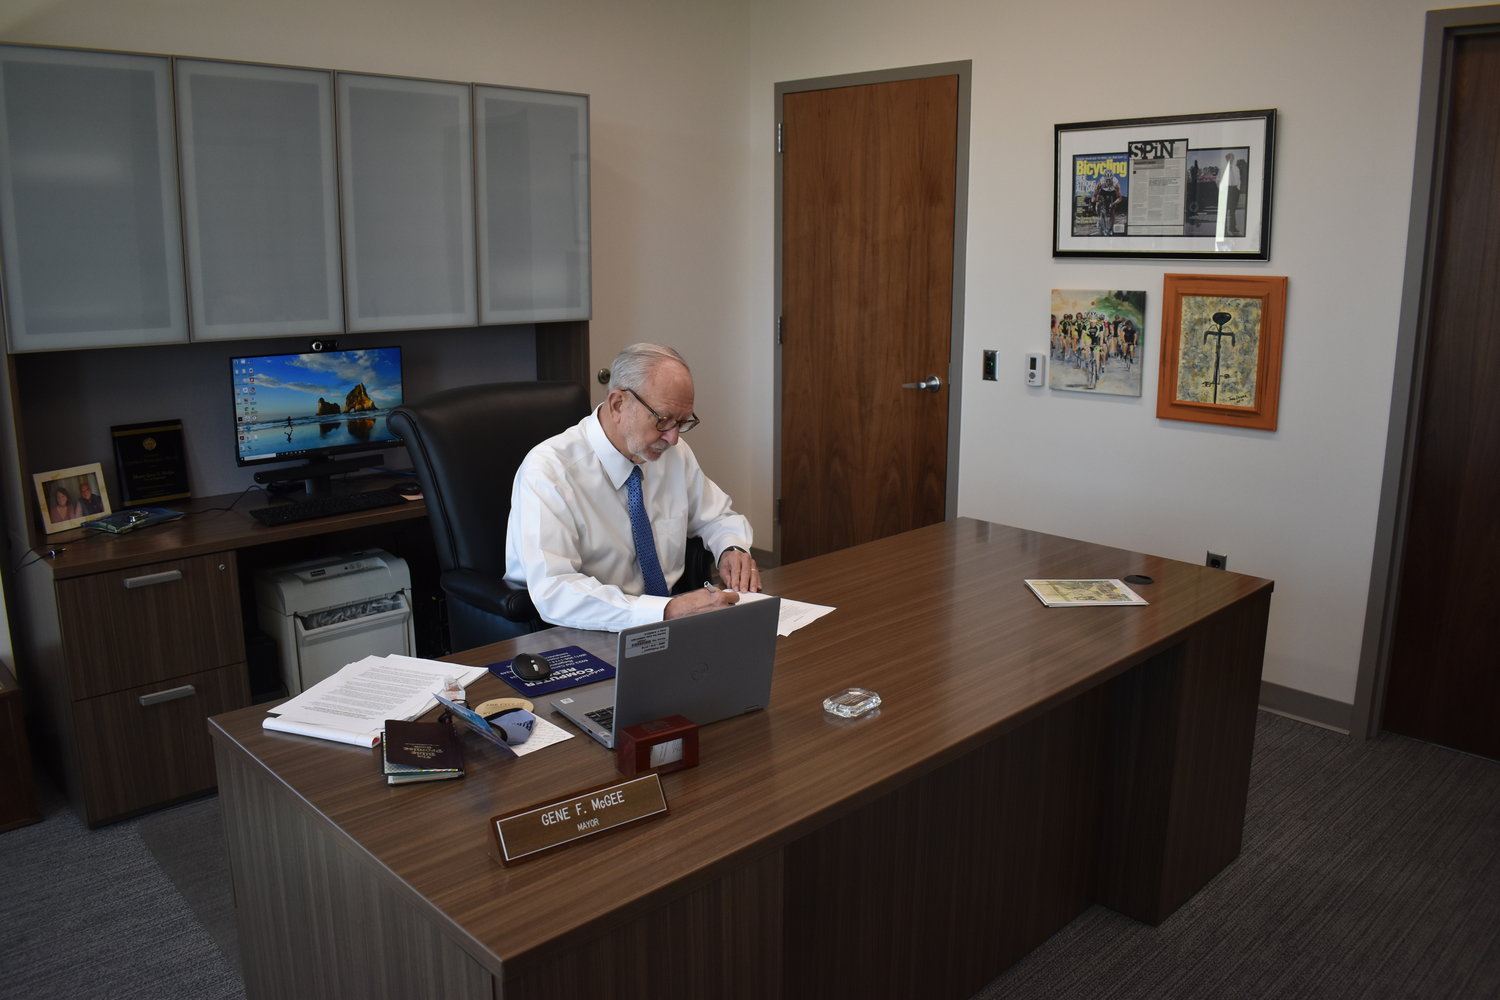 Mayor Gene F. McGee works in his office at the new Ridgeland City Hall.